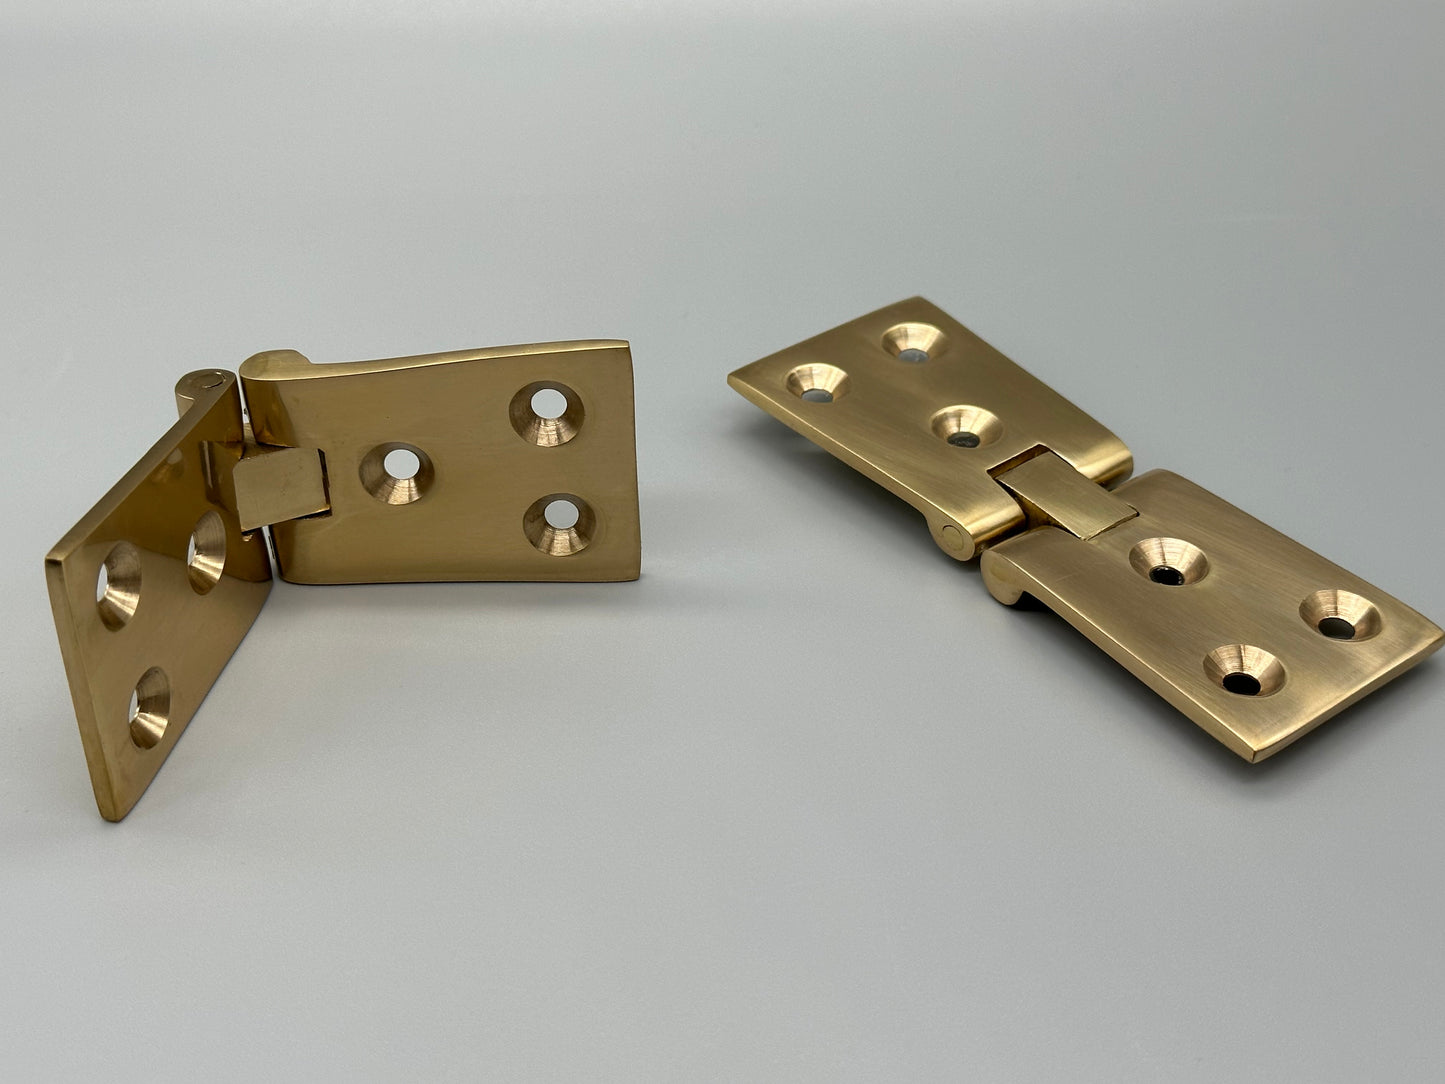 Counterflap Hinges Brass - 100mm * 32mm - Pack of 2